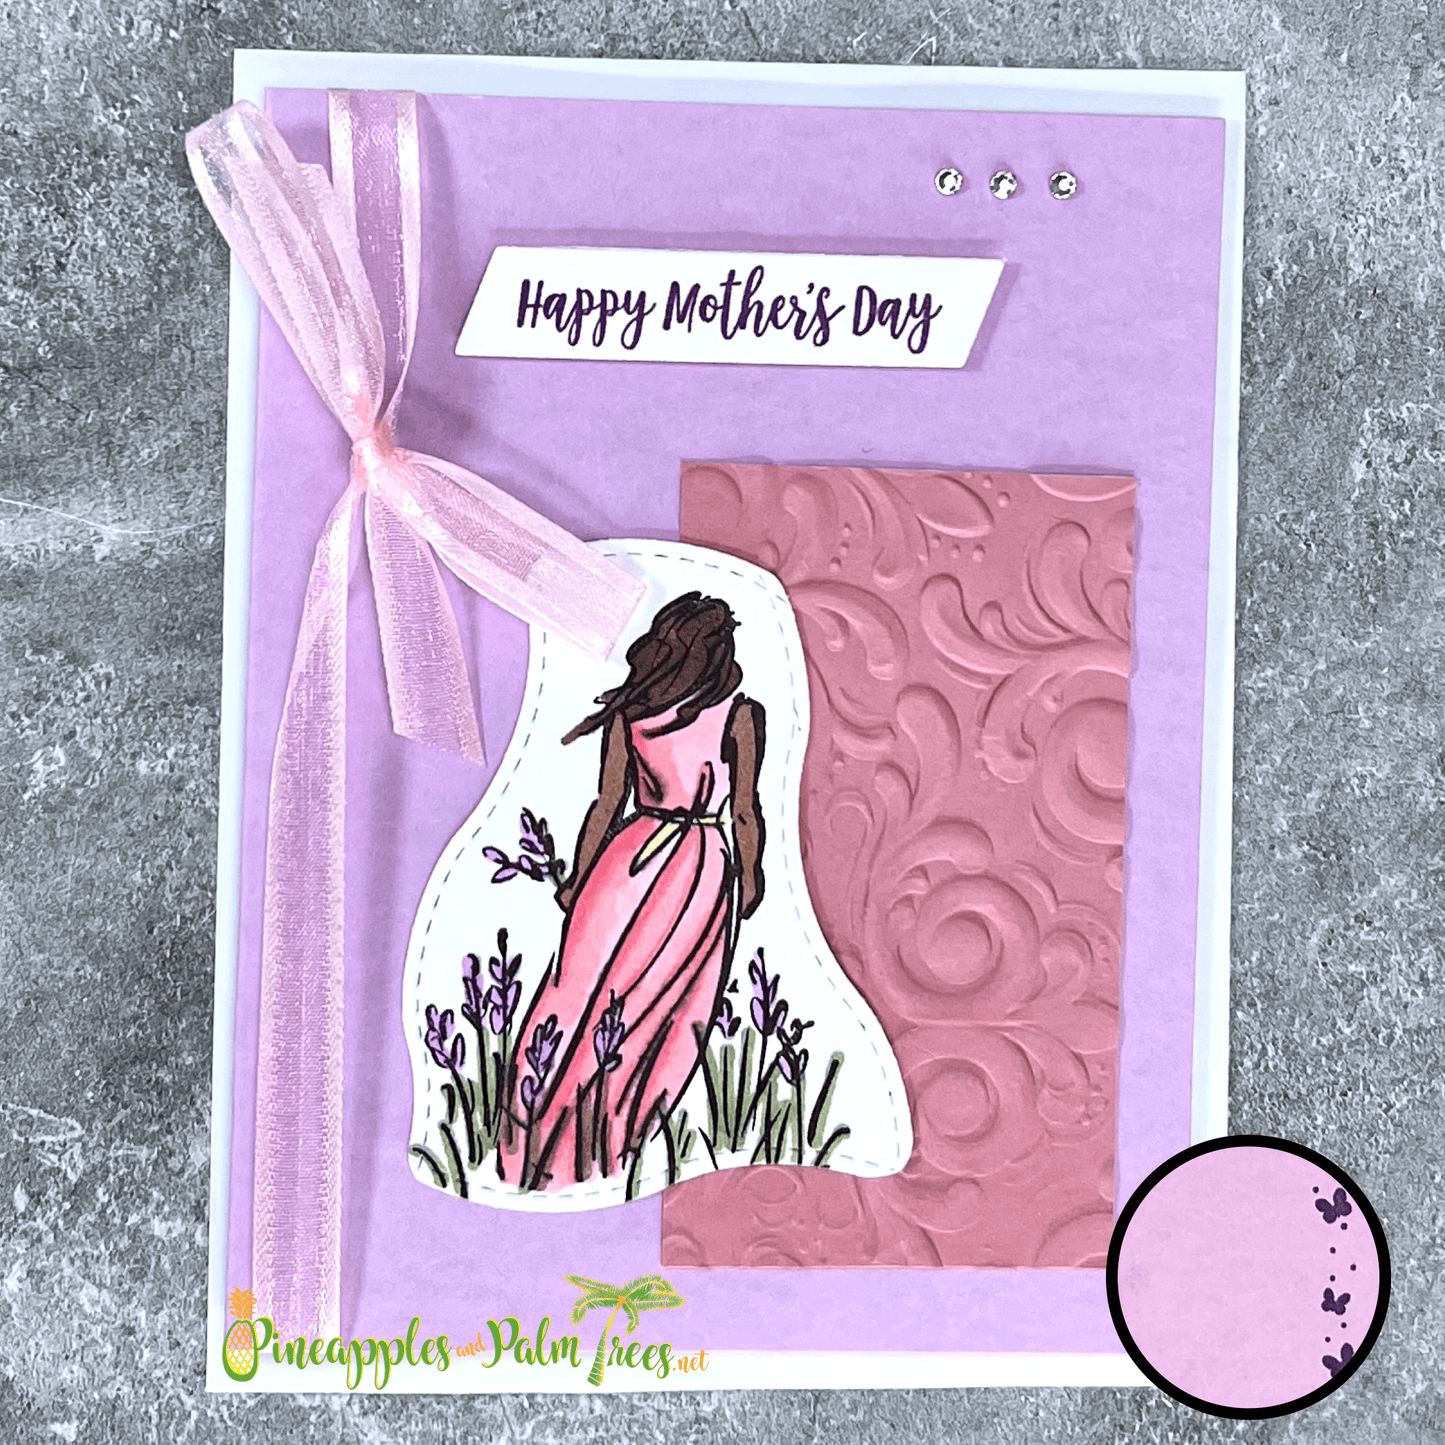 Greeting Card: Happy Mother's Day - blush